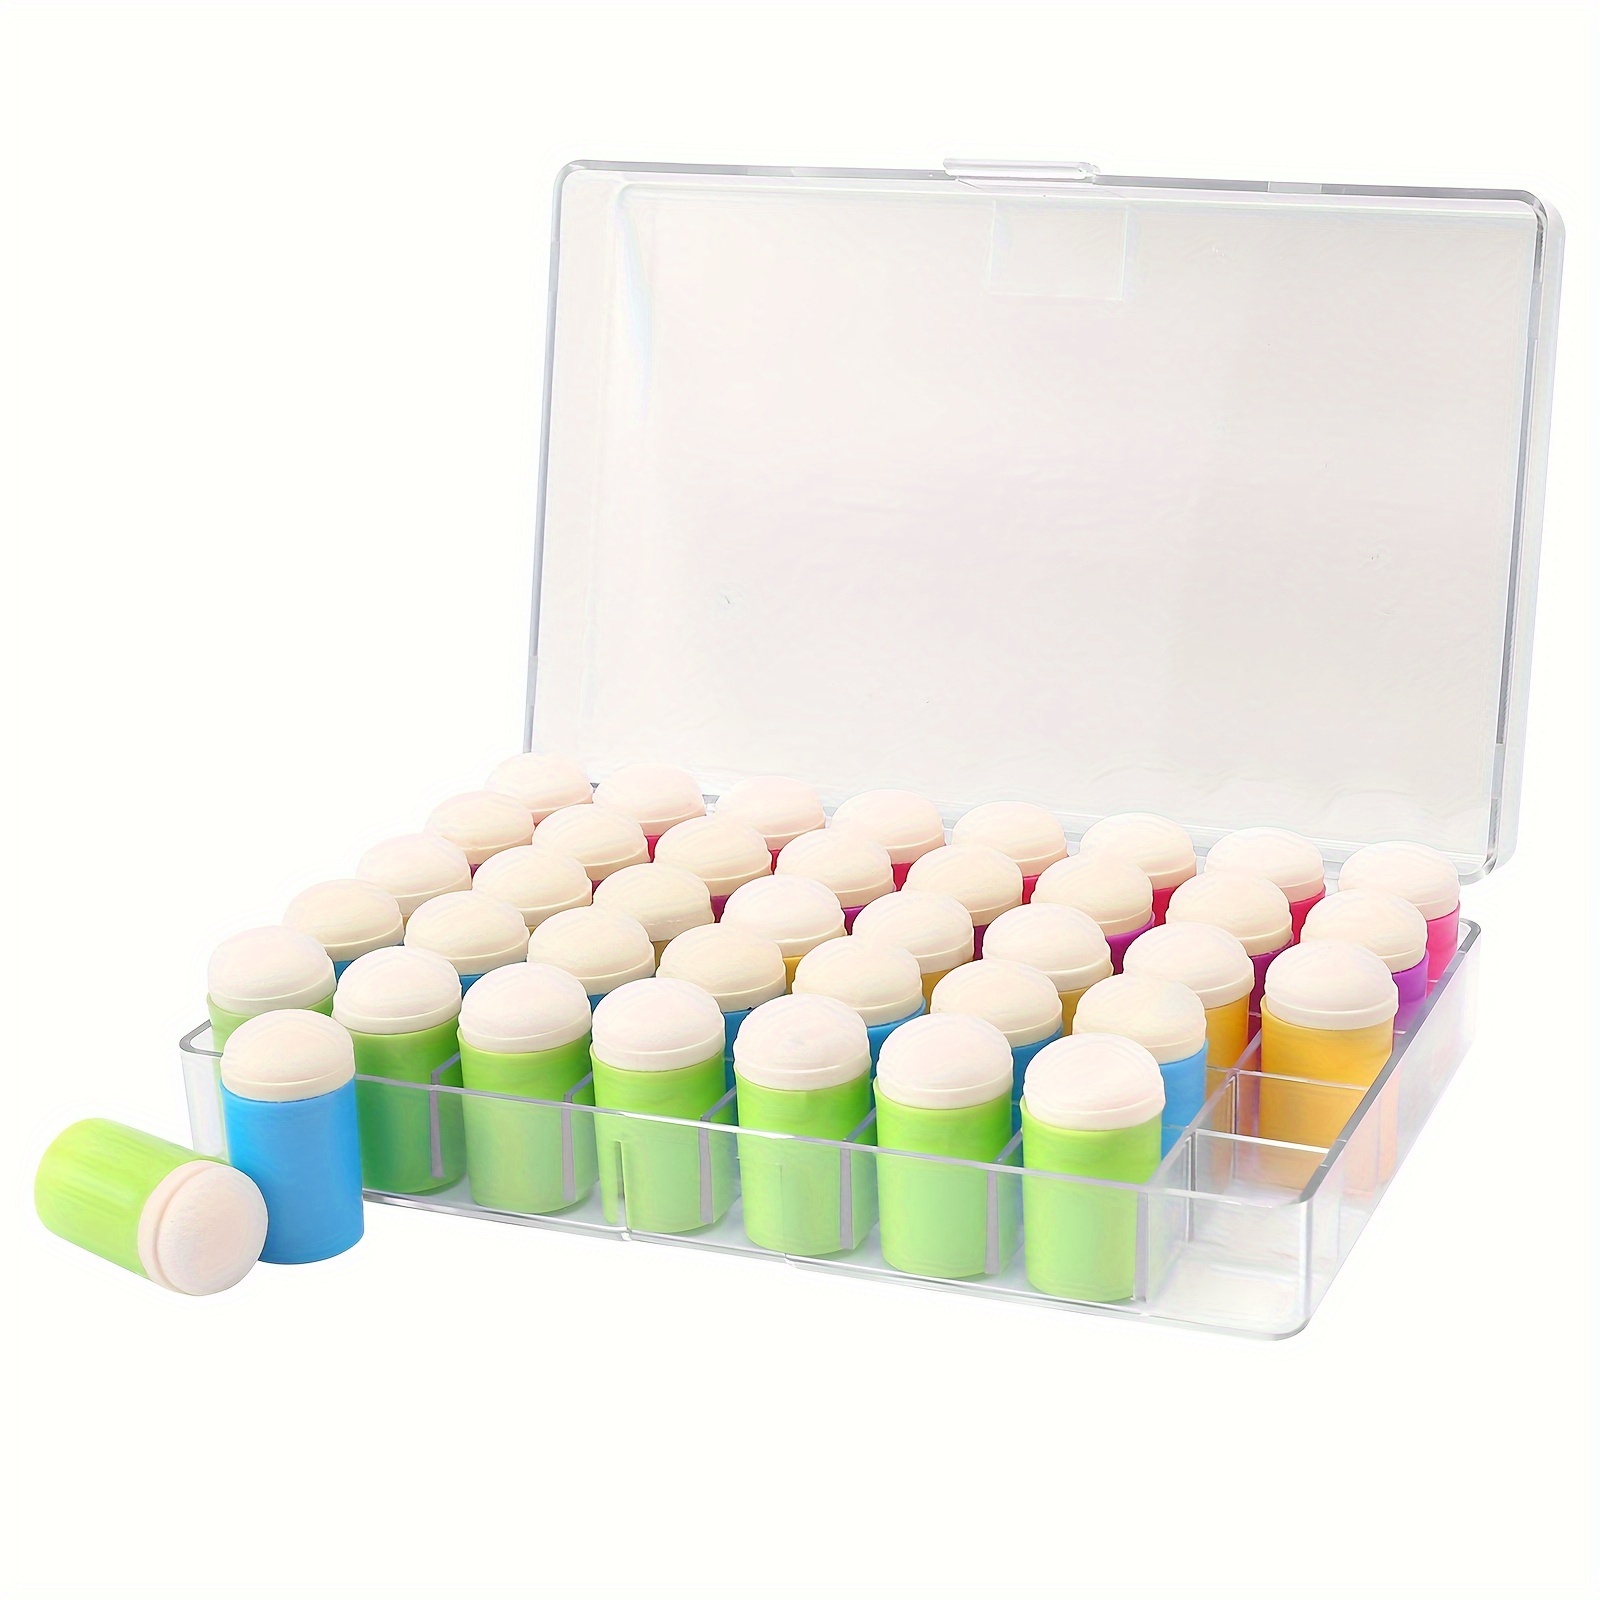 

40pcs Mixed Color Sponge Daubers With Abs Material And Storage Case - Ideal For Inks, Paints, Chalks - Precise Control For Detailed Artwork And Stenciling